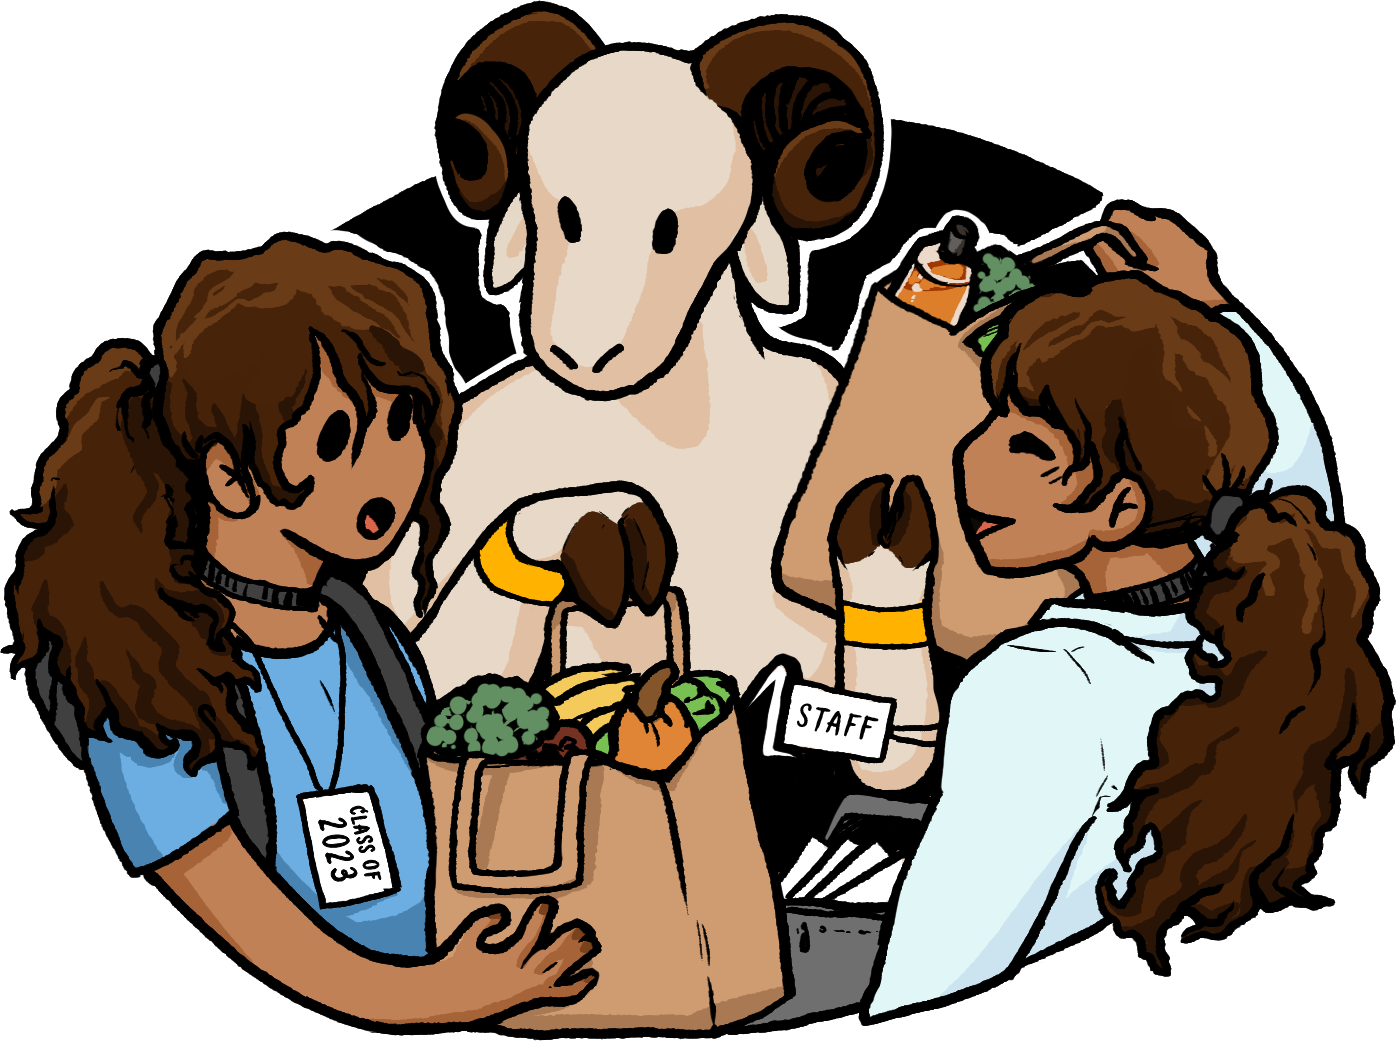 This year’s Ram Pantry food drive aims to bring convenient ways for all members of the VCU School of Medicine community to participate (Illustration by Uri Hamman, VCU School of Medicine)